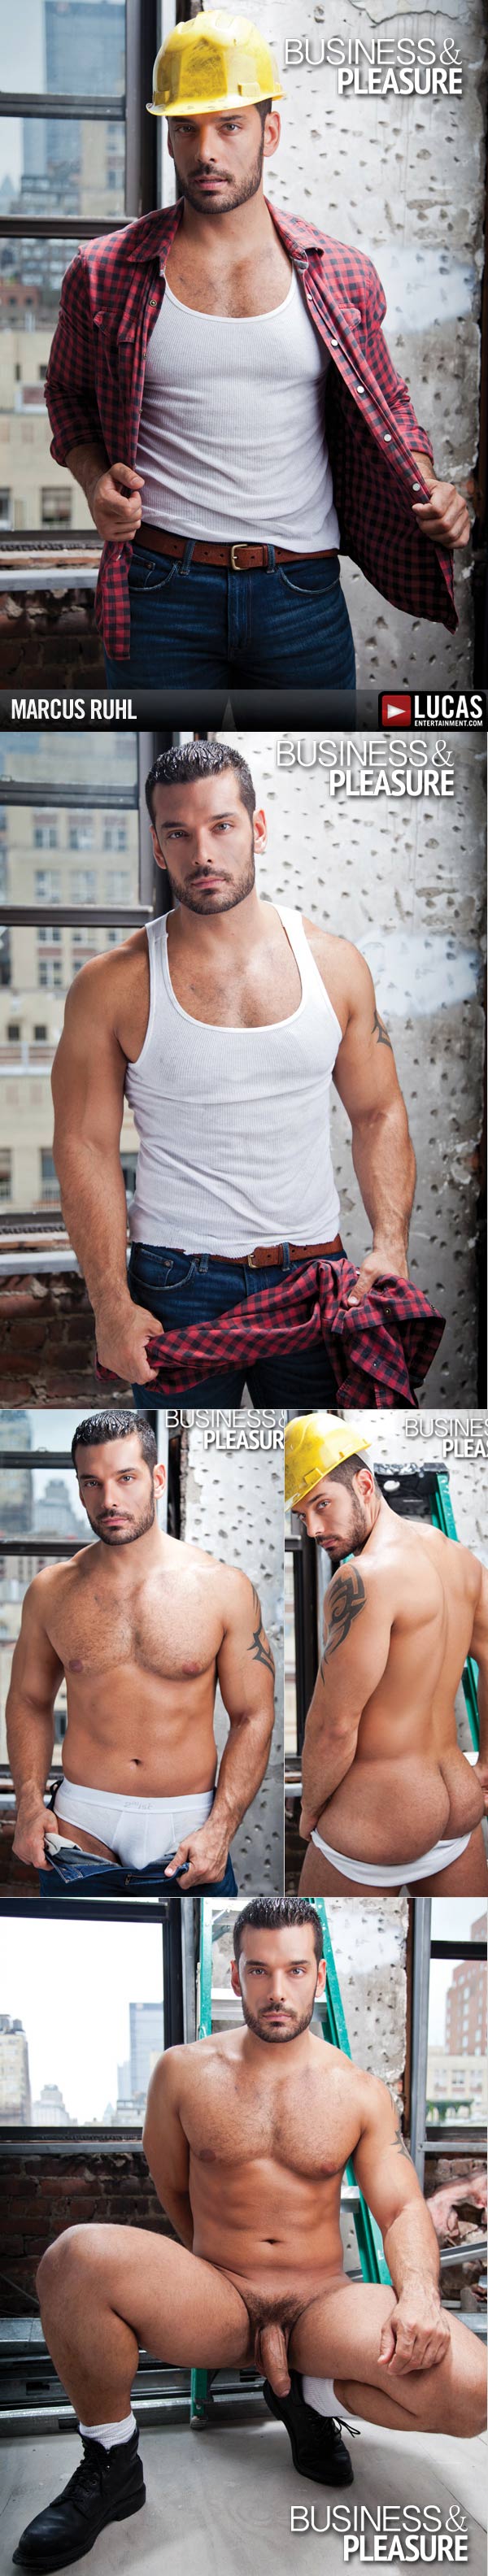 Business and Pleasure (Bryan Cole & Marcus Ruhl) at LucasEntertainment.com